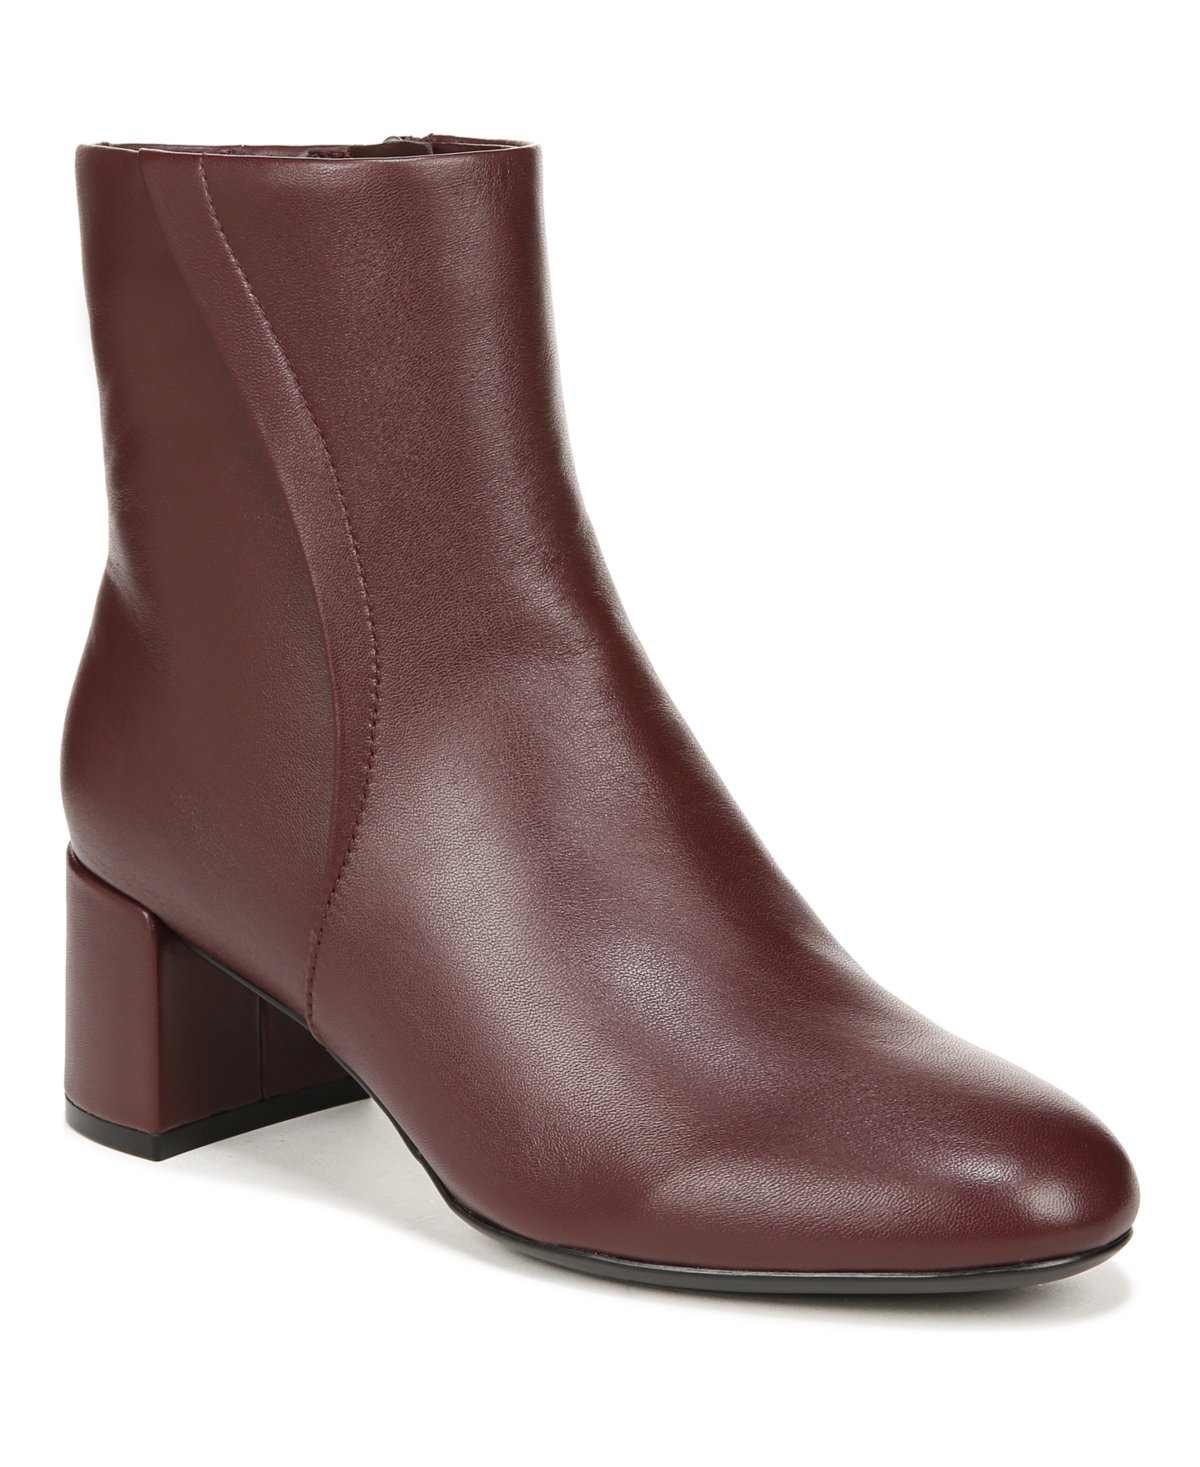 Naturalizer River Booties In Cabernet Sauvignon Leather